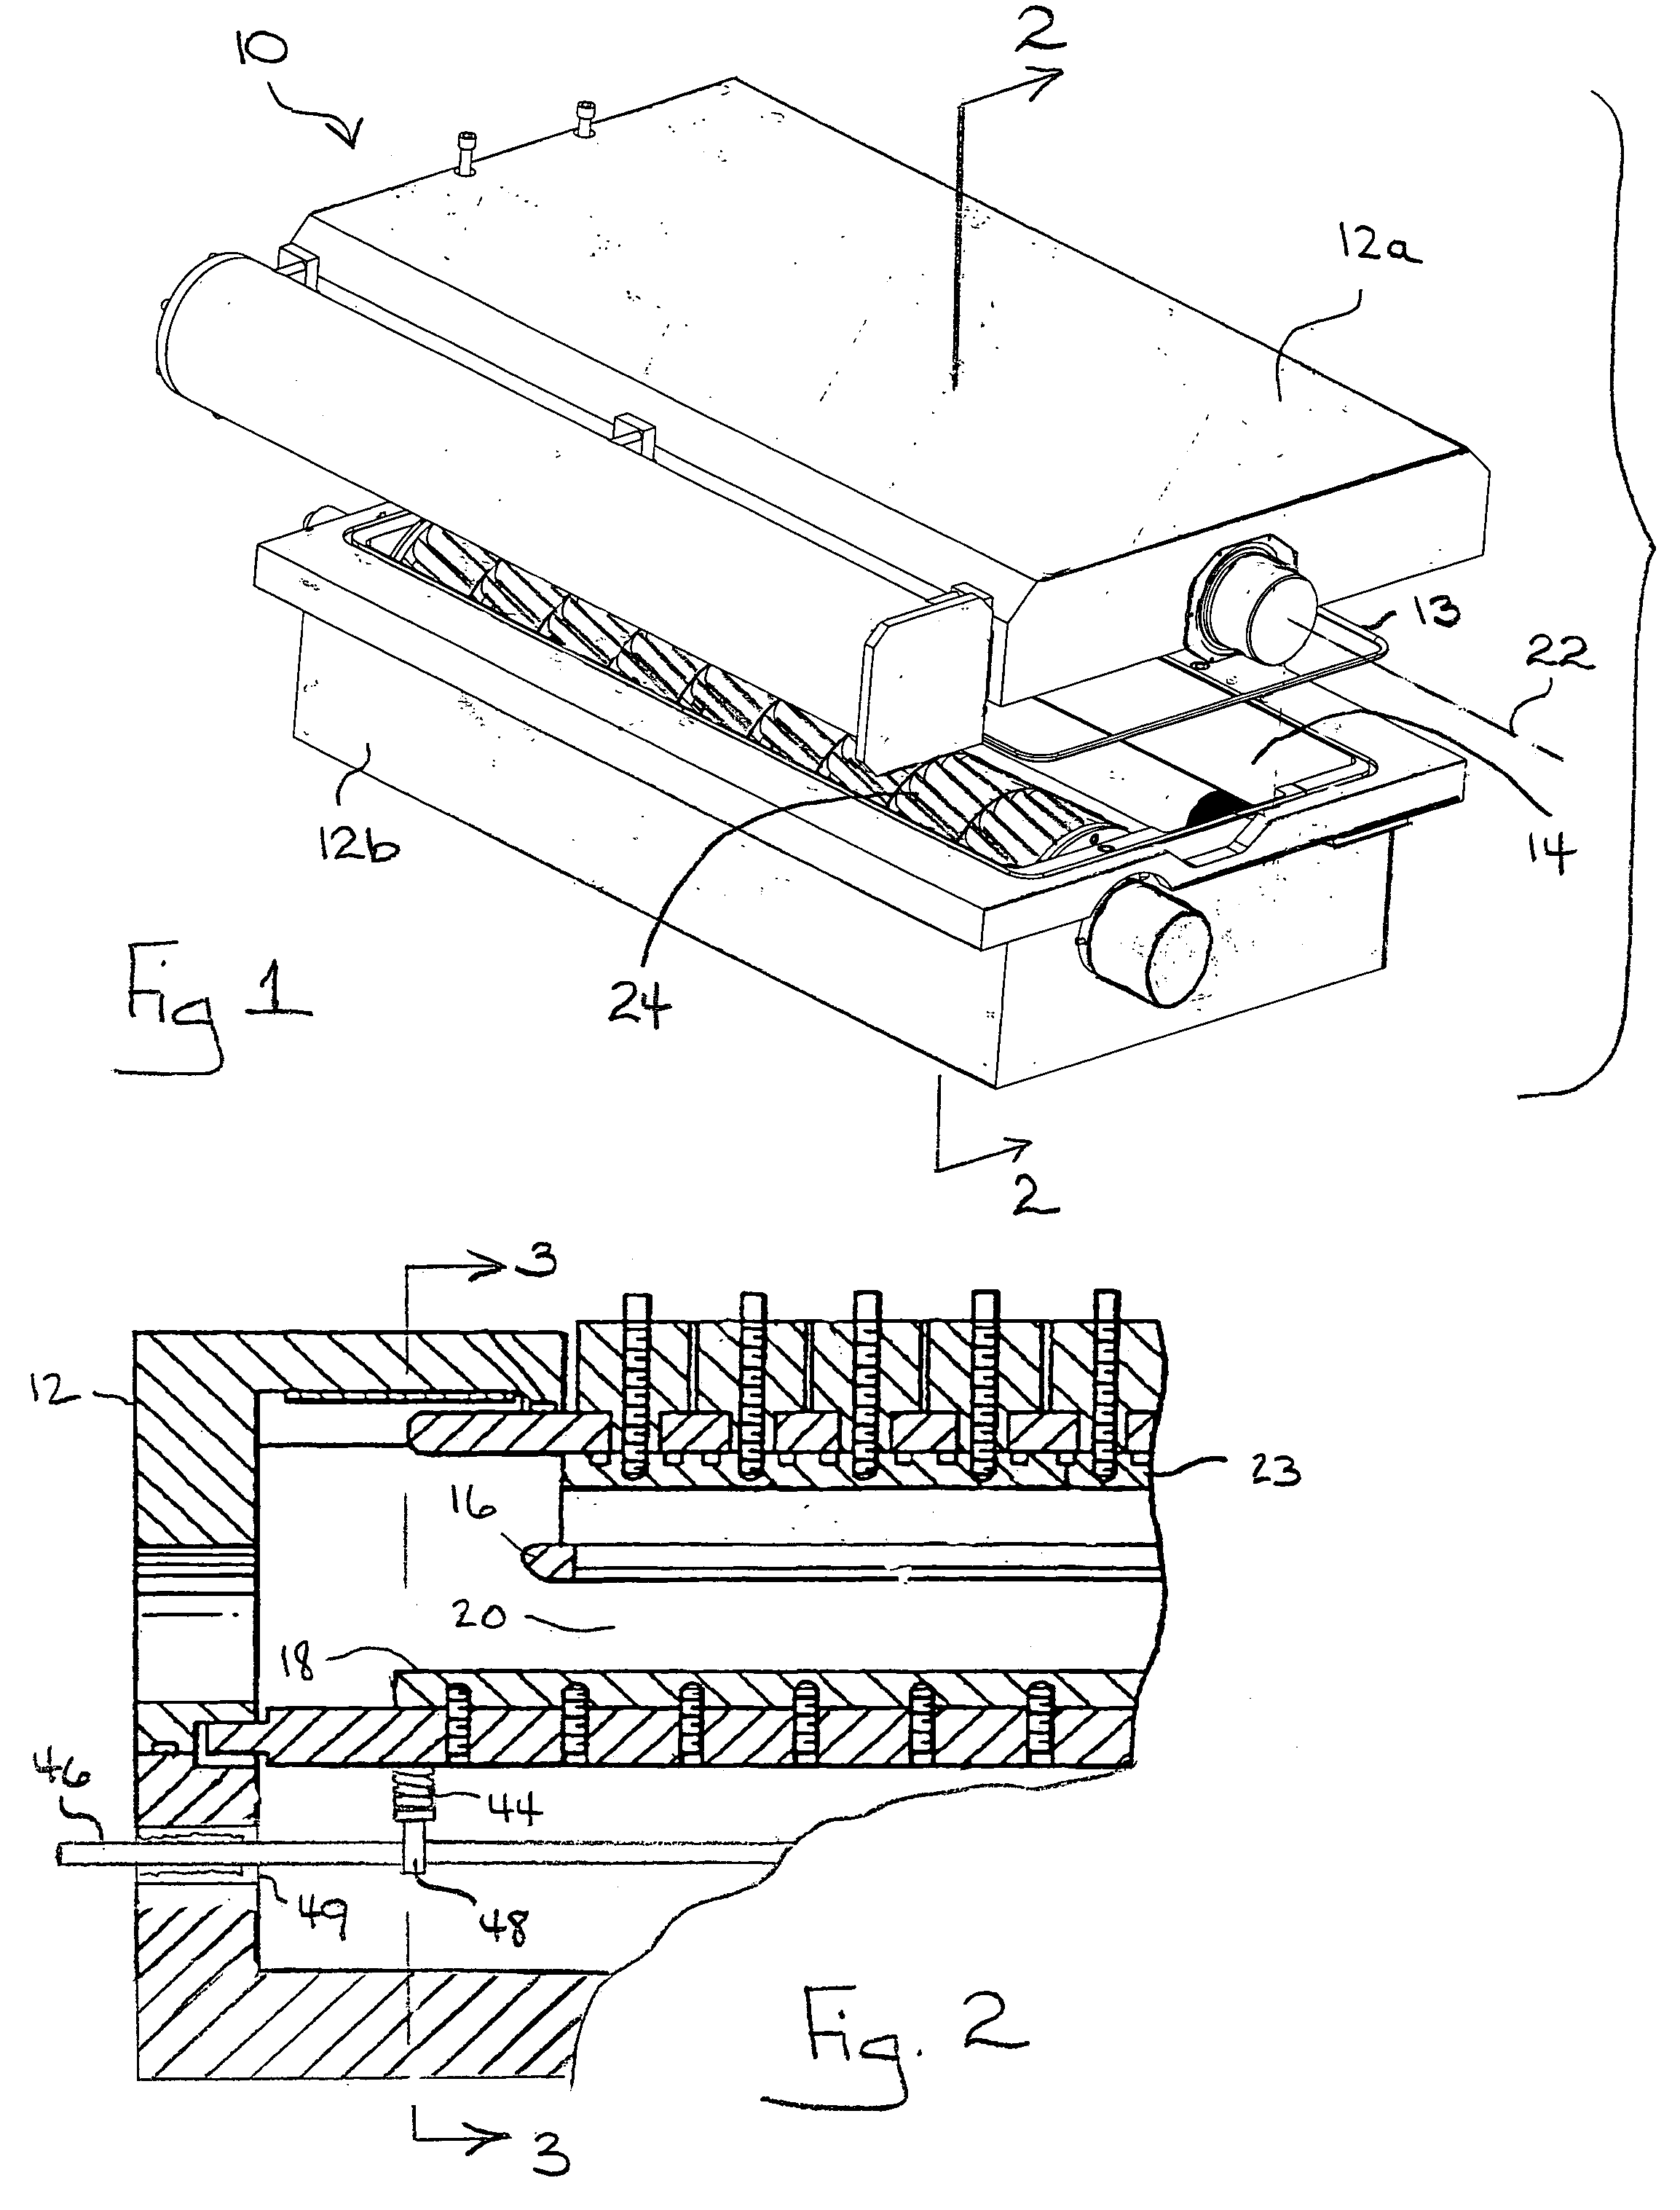 Adjustable flow guide to accommodate electrode erosion in a gas discharge laser